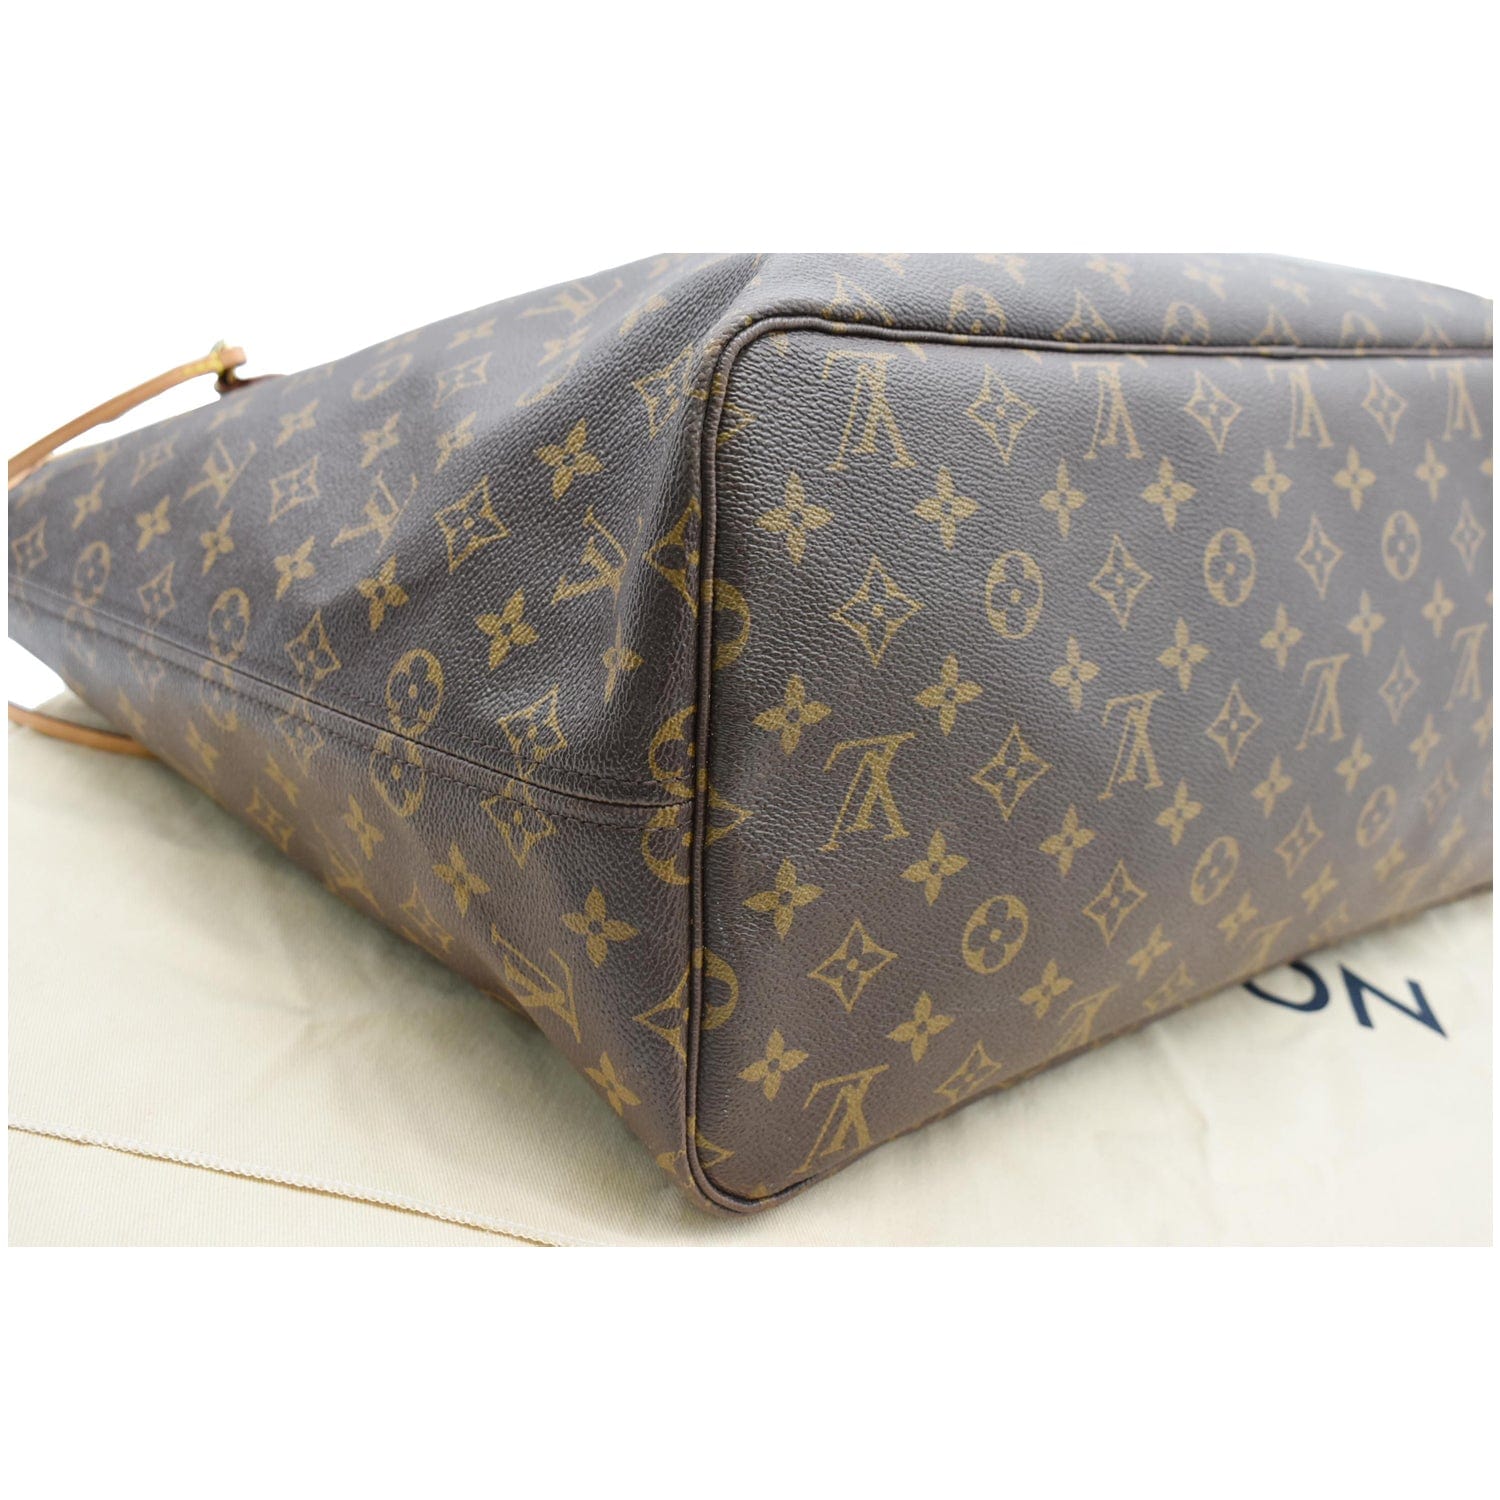 Louis Vuitton Neverfull Gm Tote Bag Tan - $1394 - From Ava